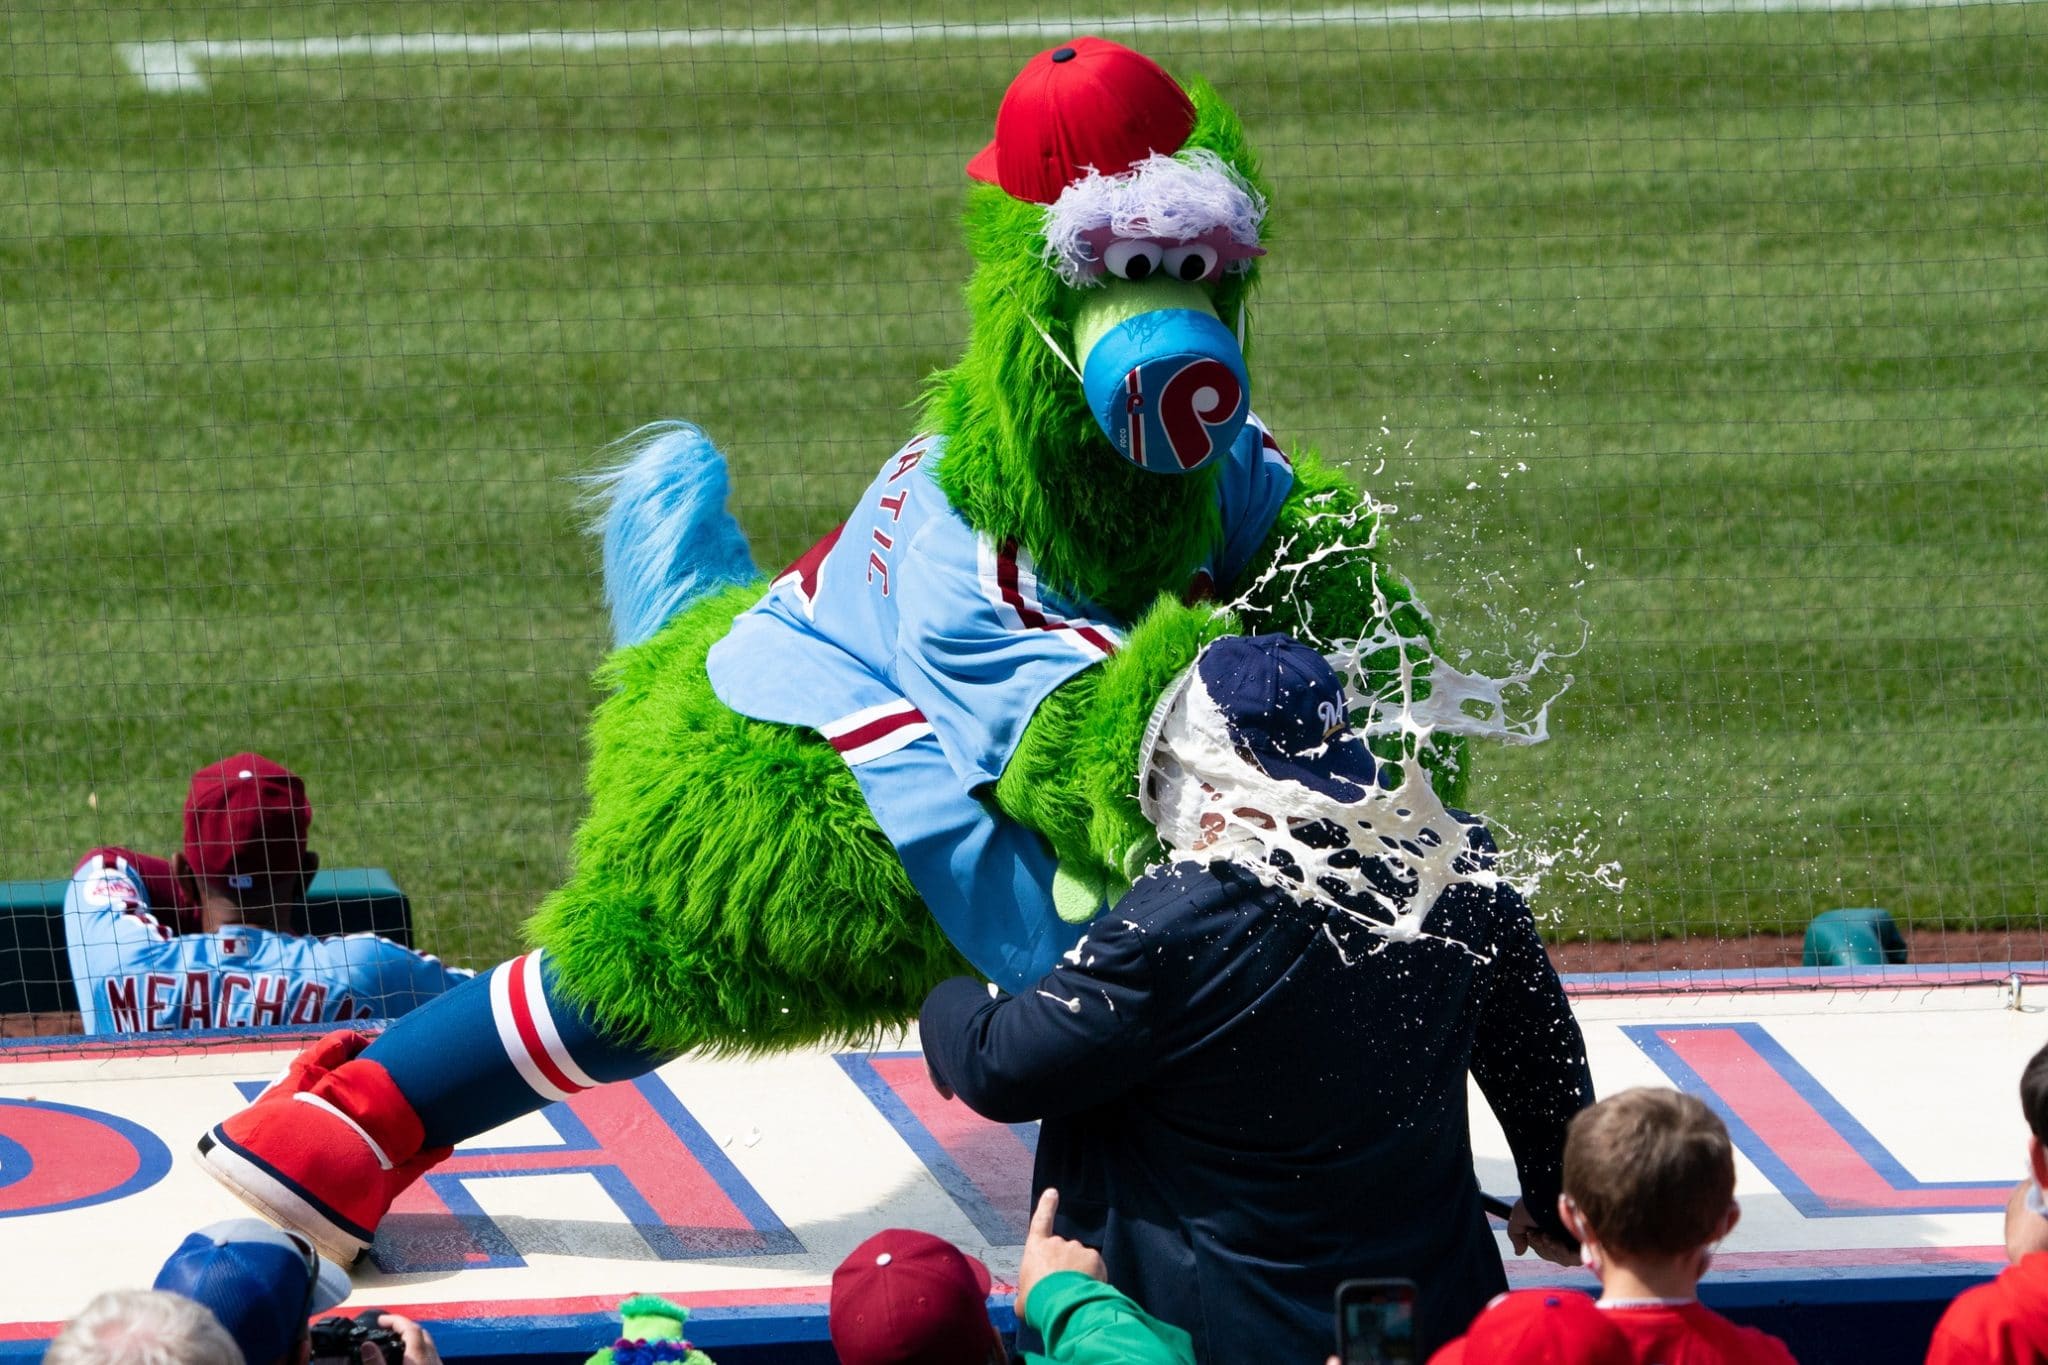 Goofy Legal Quirk Involving Fanatics and the Phillie Phanatic